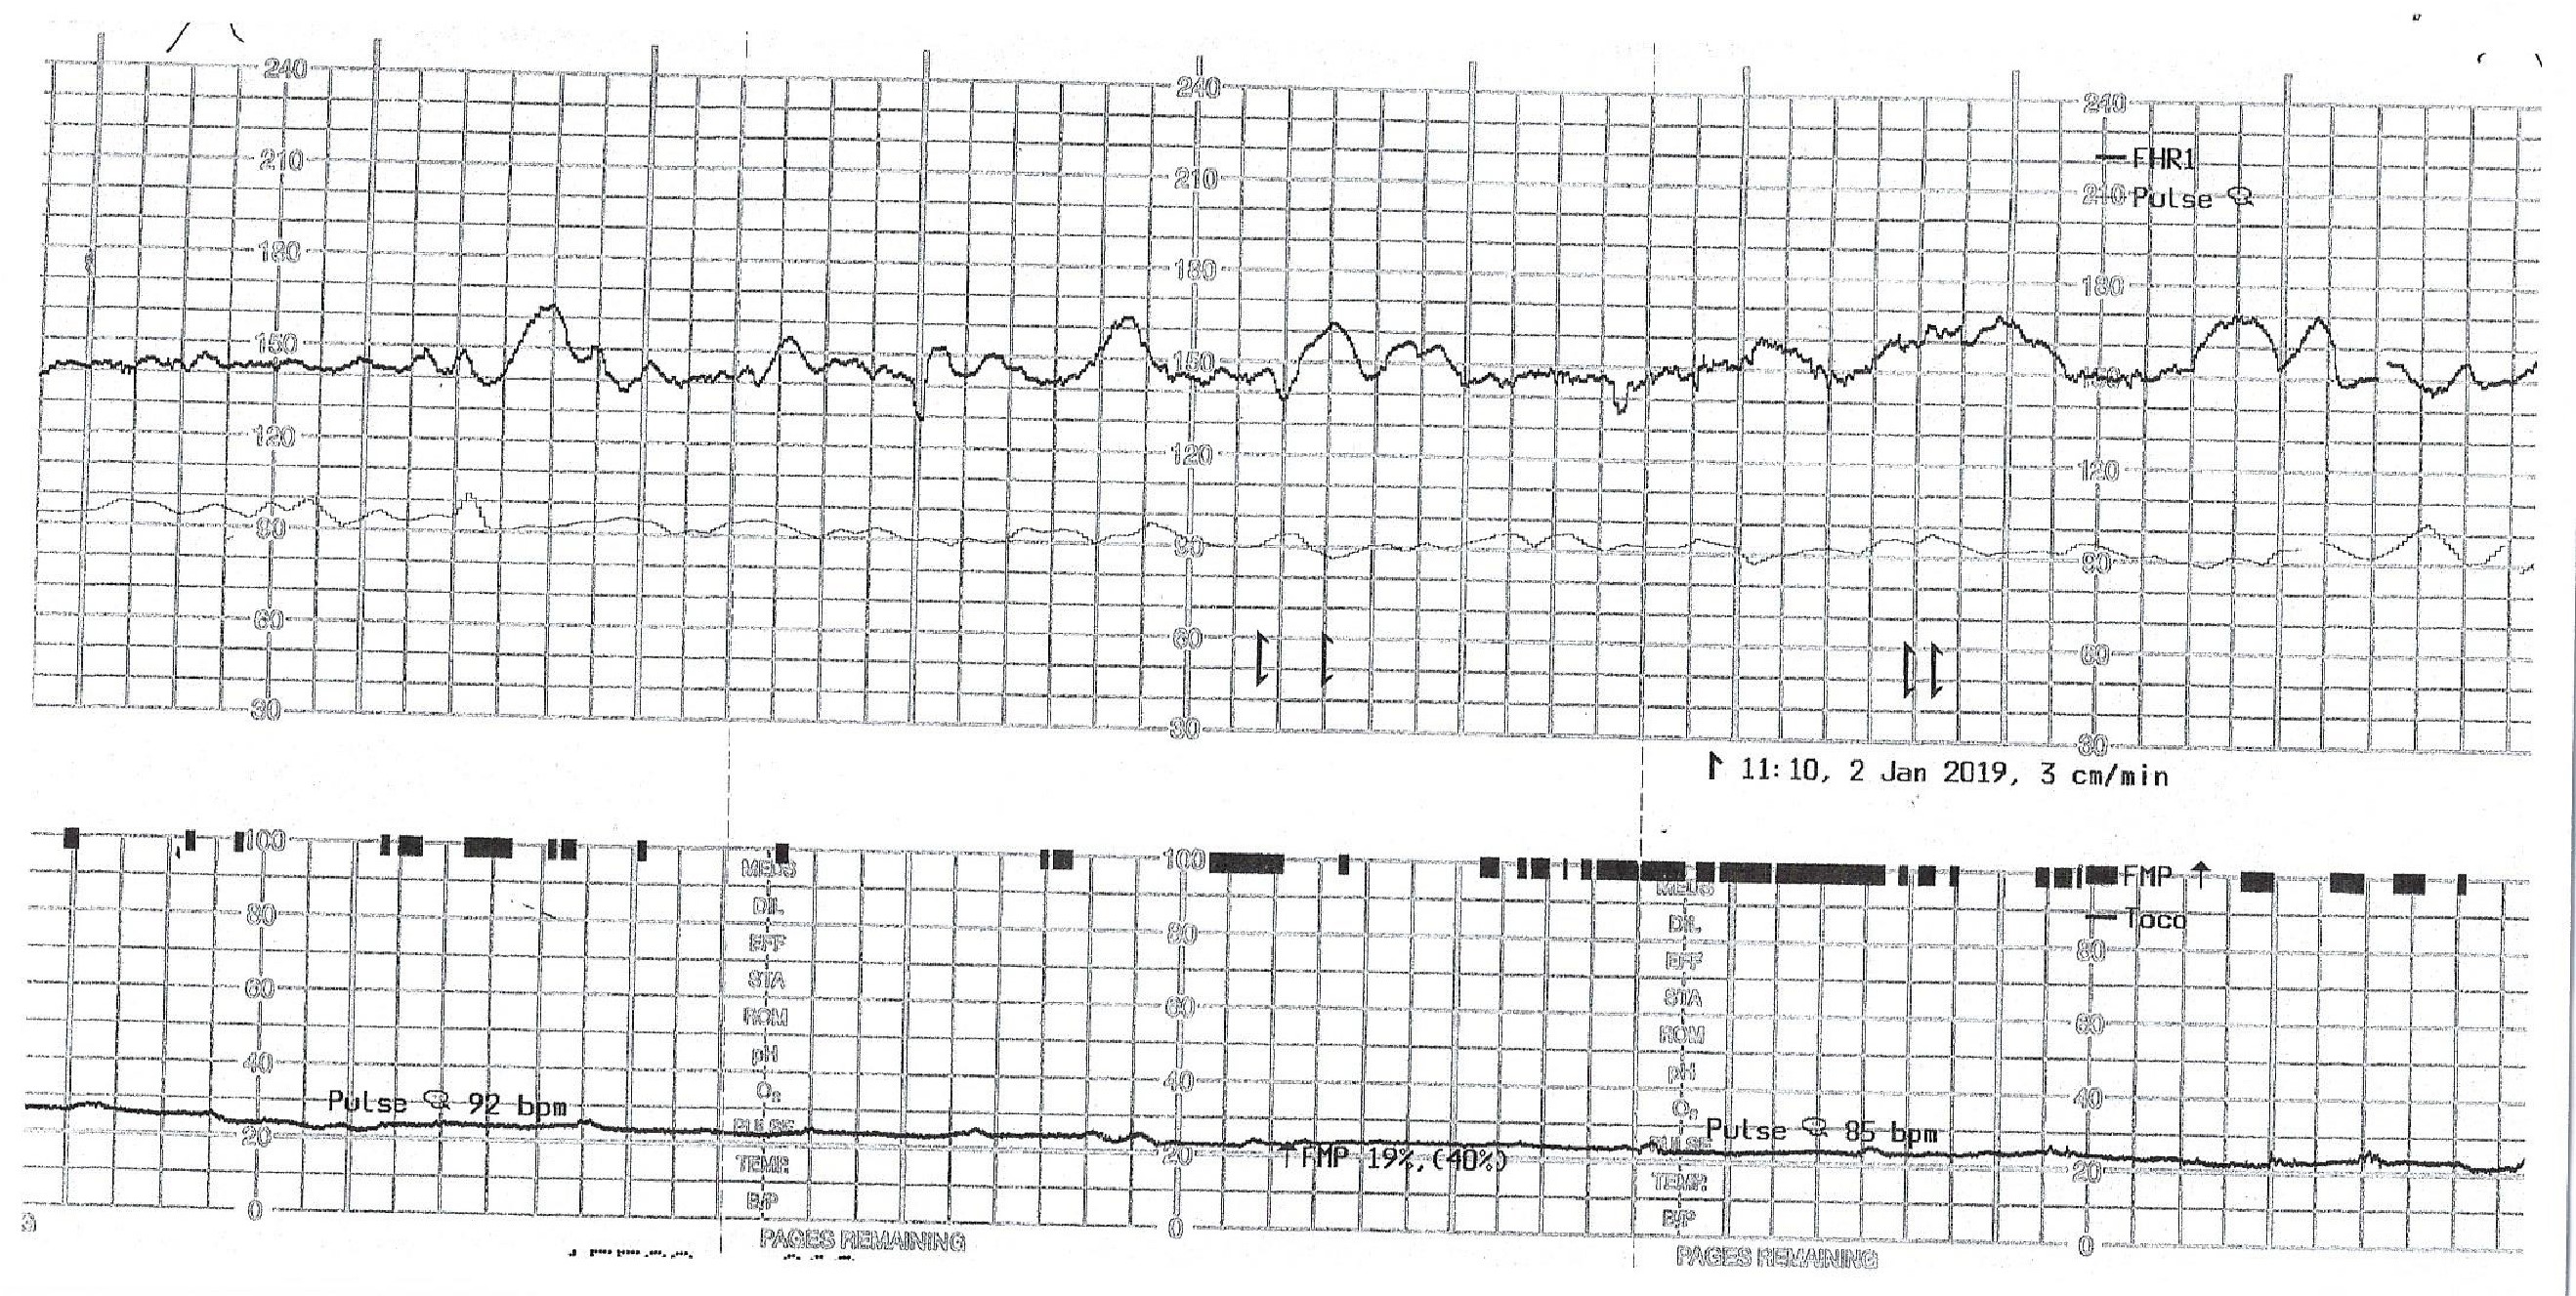 Nonstress test showing fetal heart rate tracing, fetal movement and contraction tracing